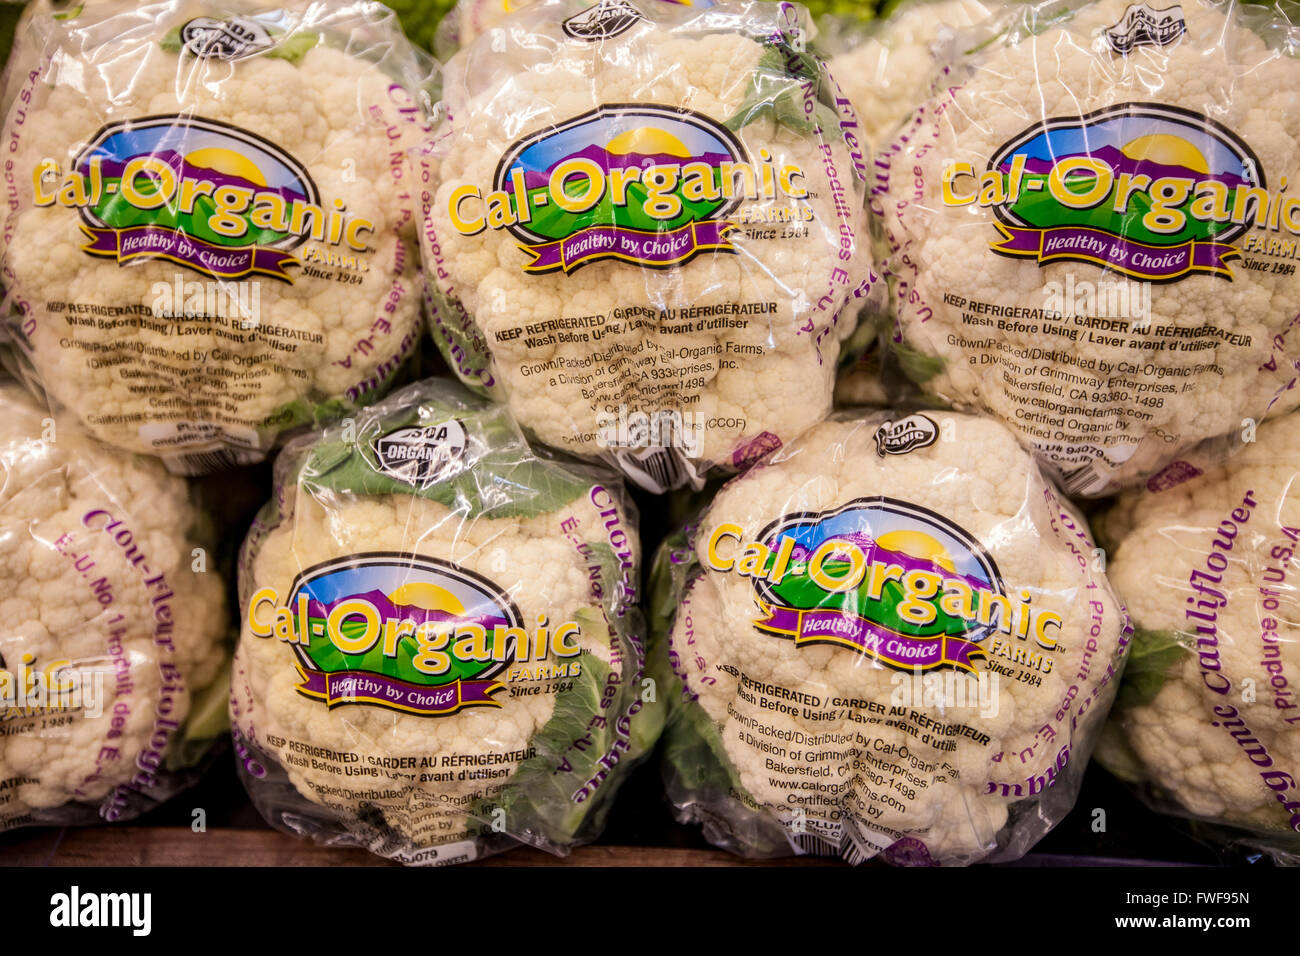 a display of organic cauliflower at a Whole Foods Market in the produce section Stock Photo